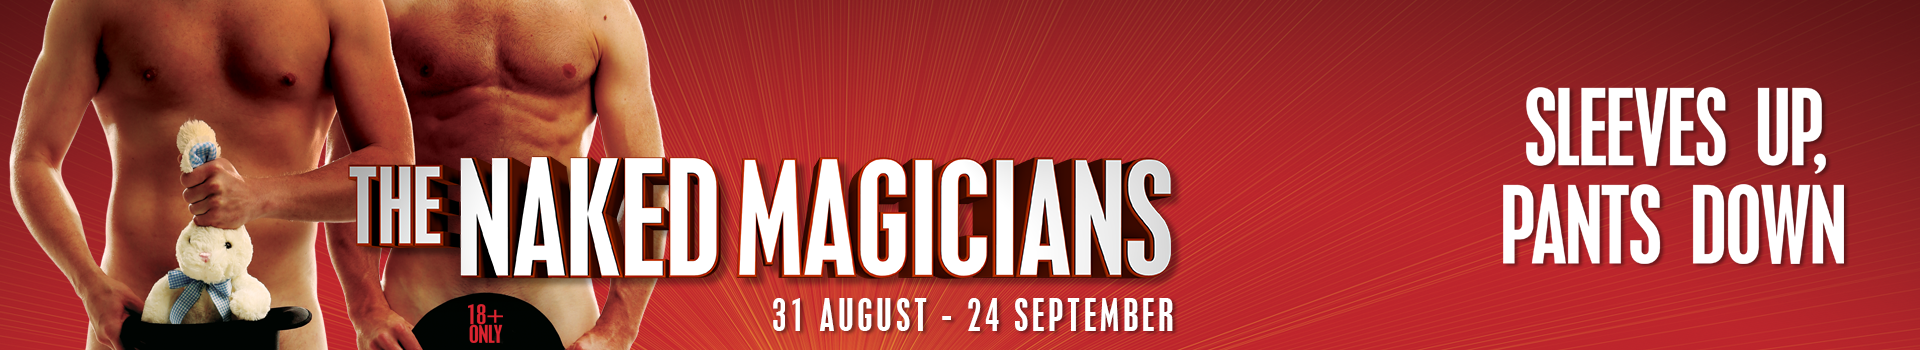 Naked Magicians banner image